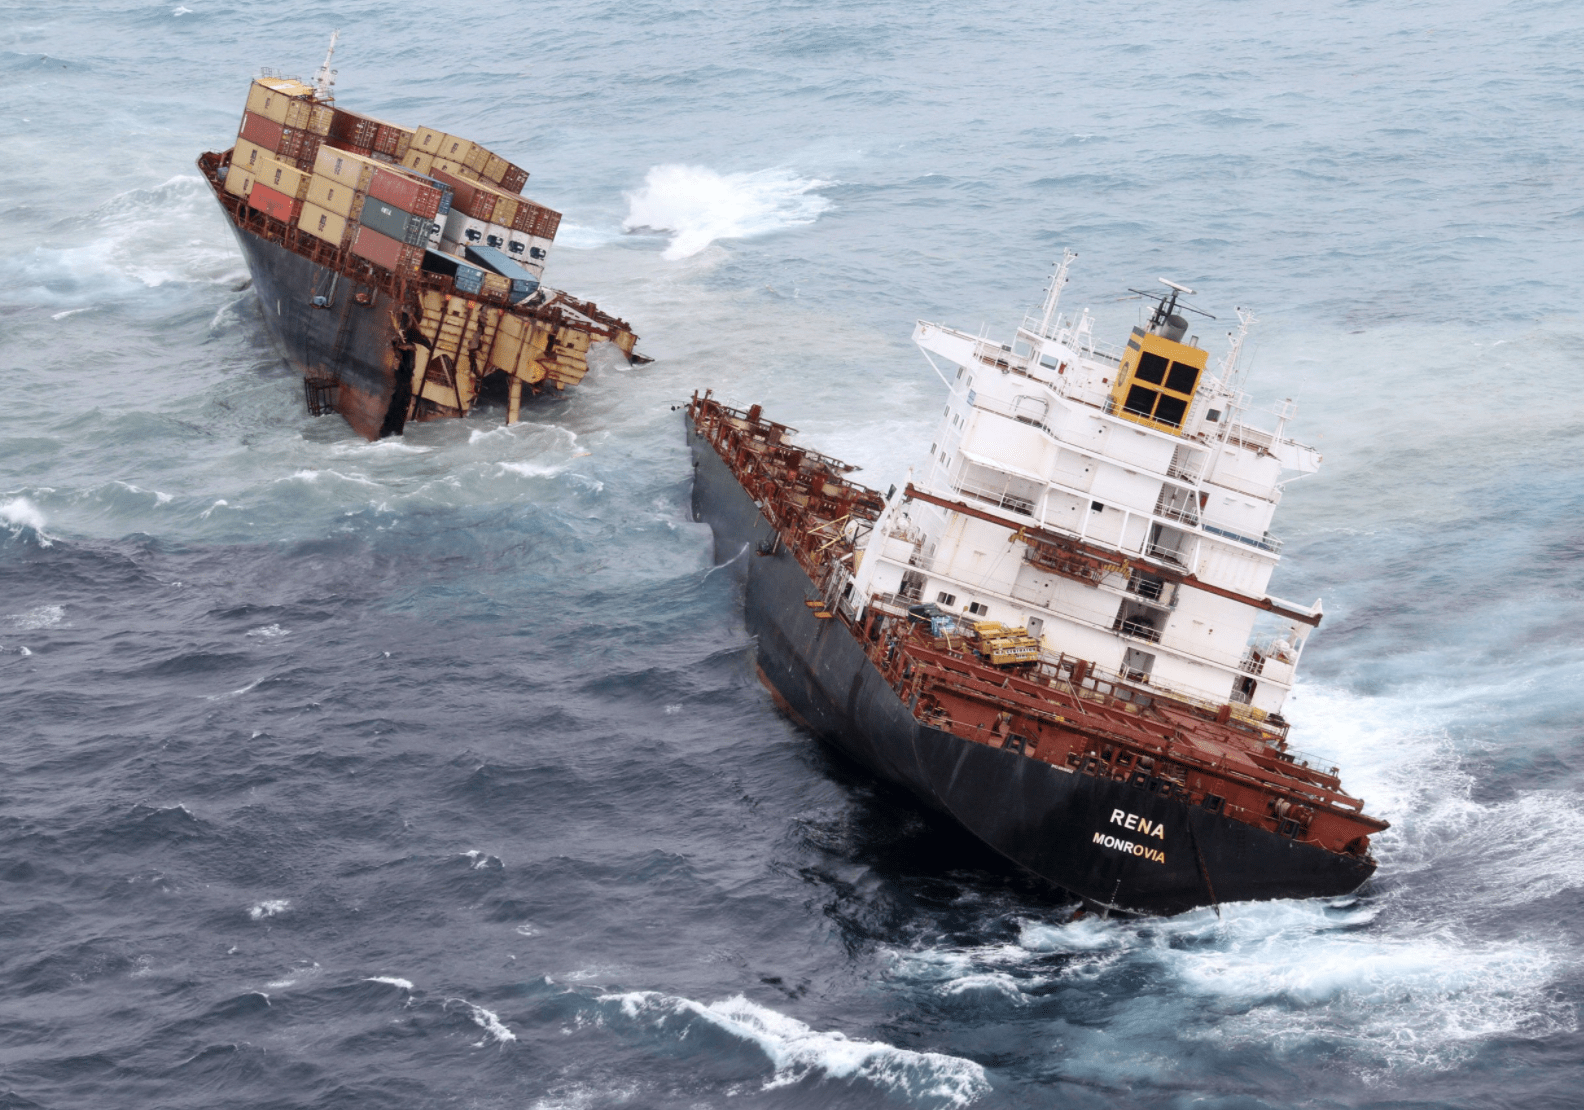 sea freight on a ship in trouble who is responsible for freight insurance?